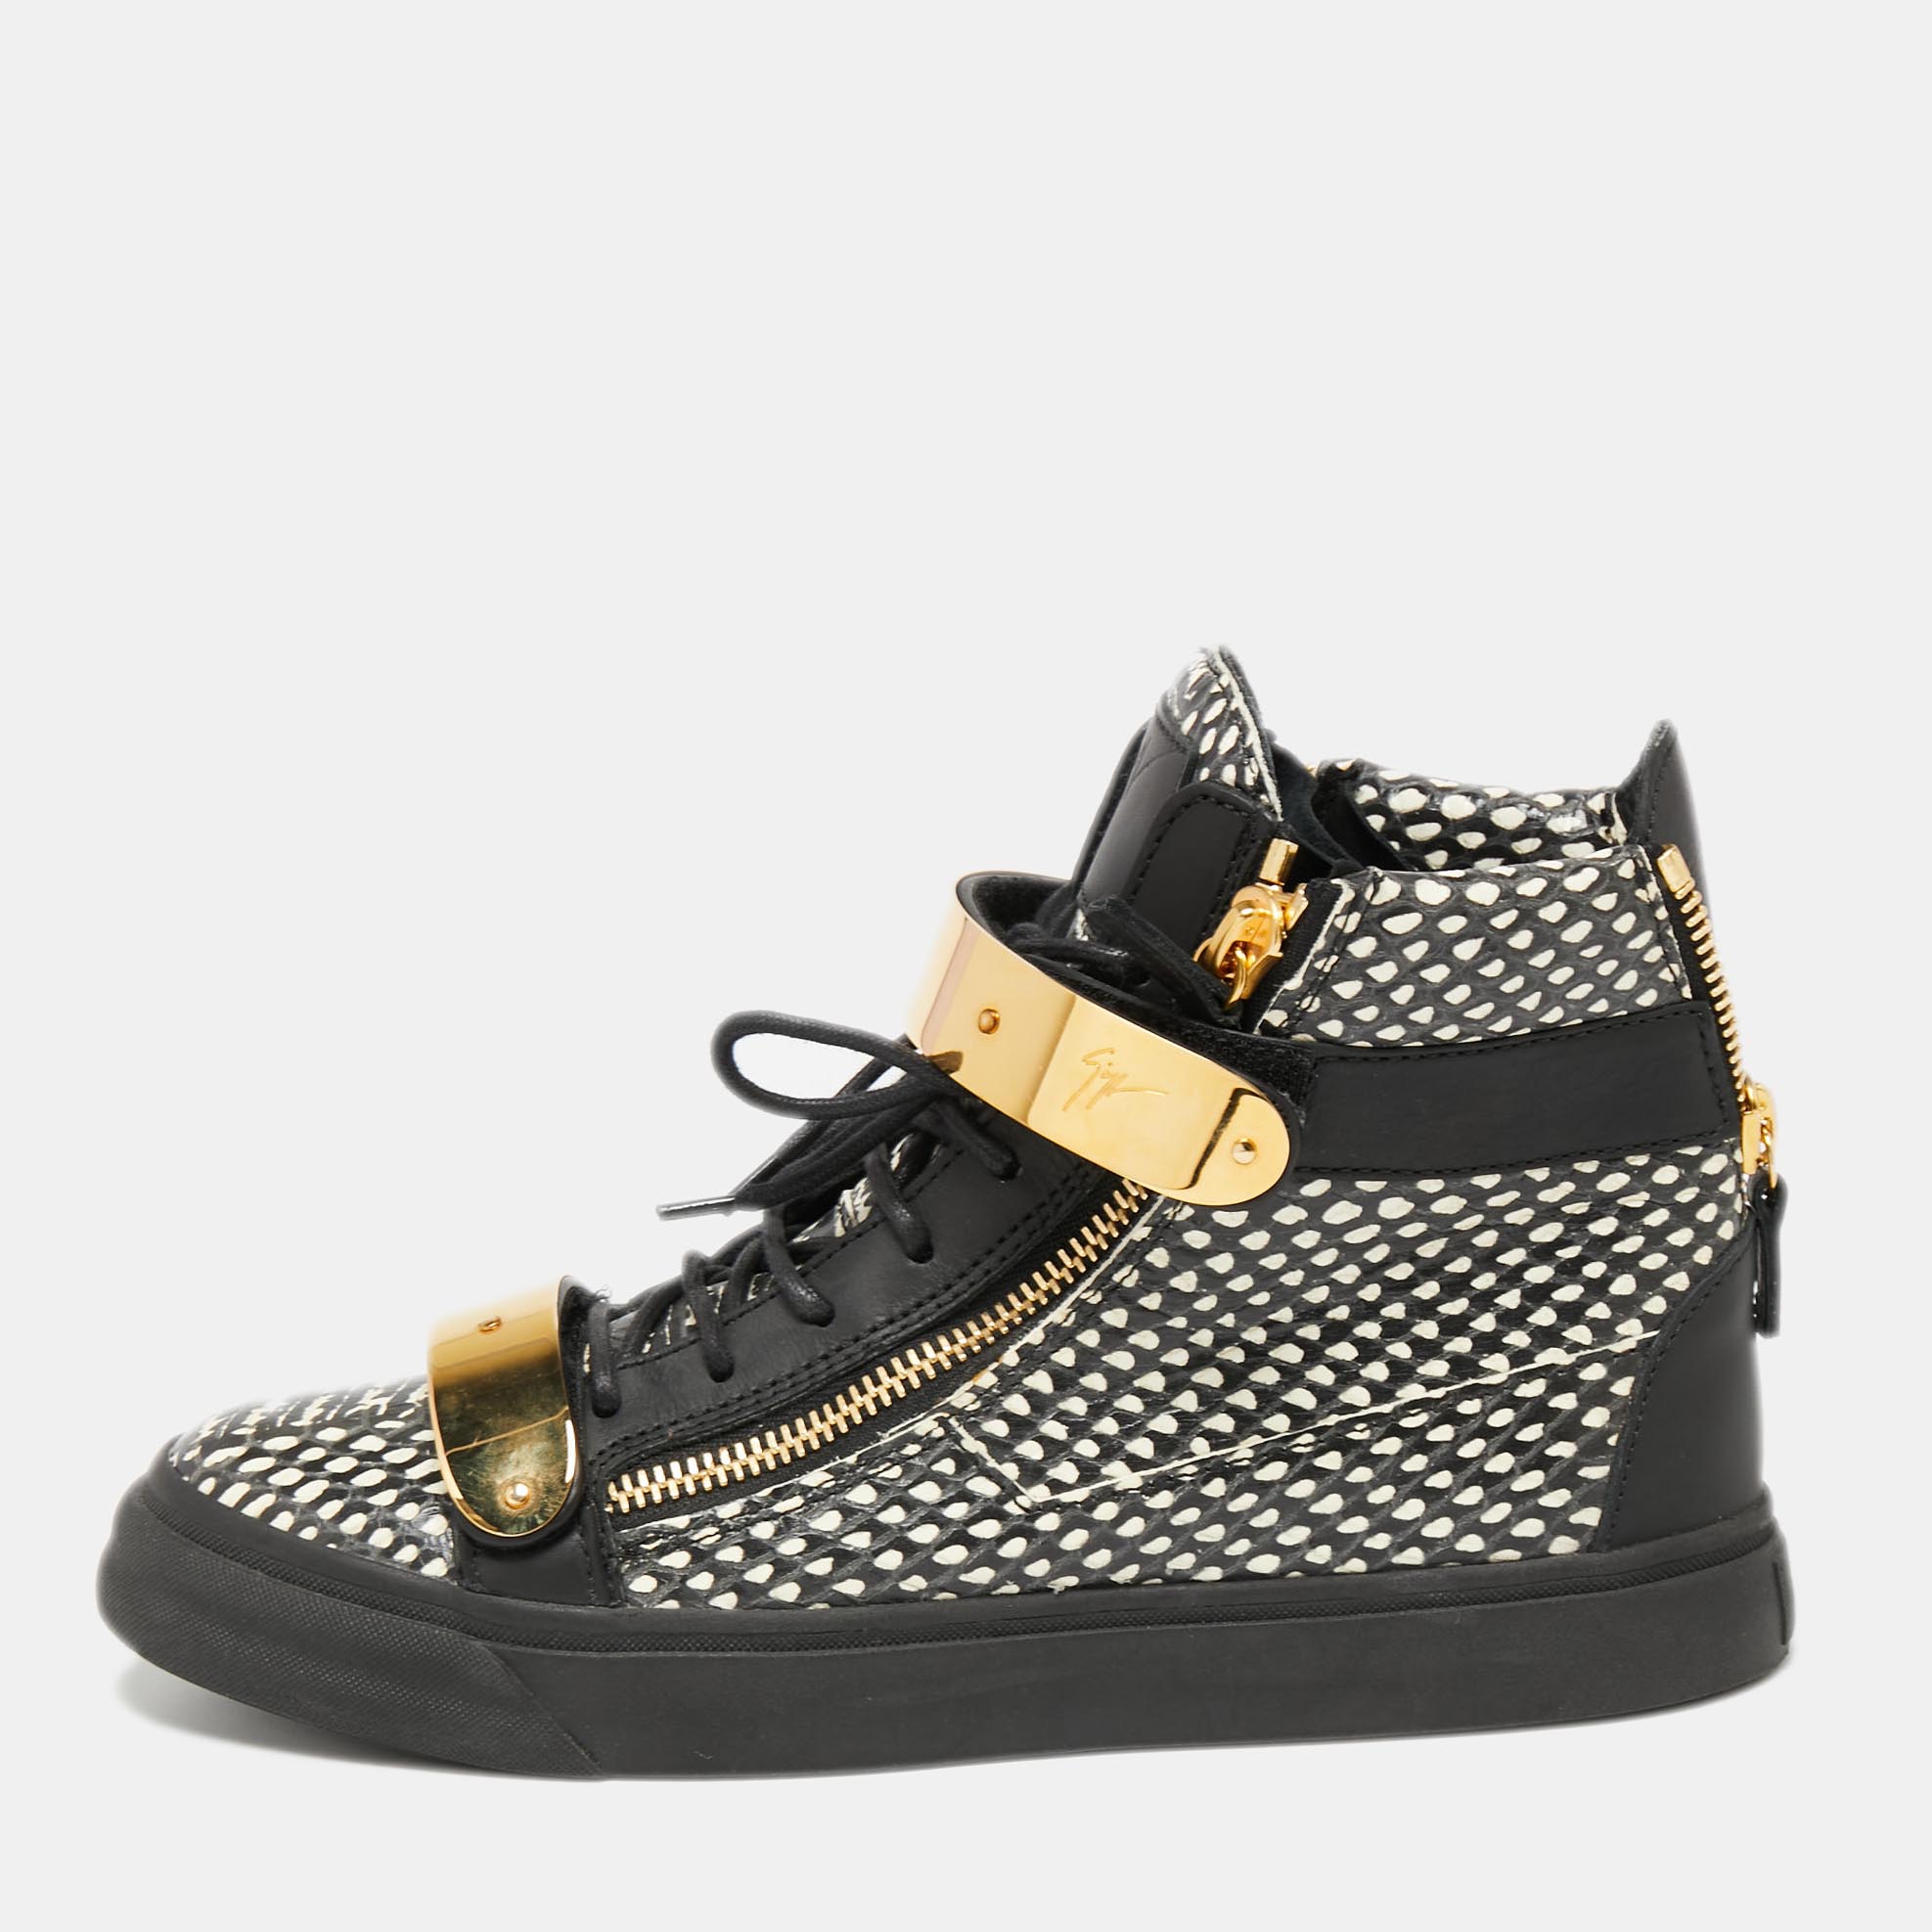 Pre-owned Giuseppe Zanotti Black/white Snakeskin Embossed And Leather High Top Double Zip Sneakers Size 40